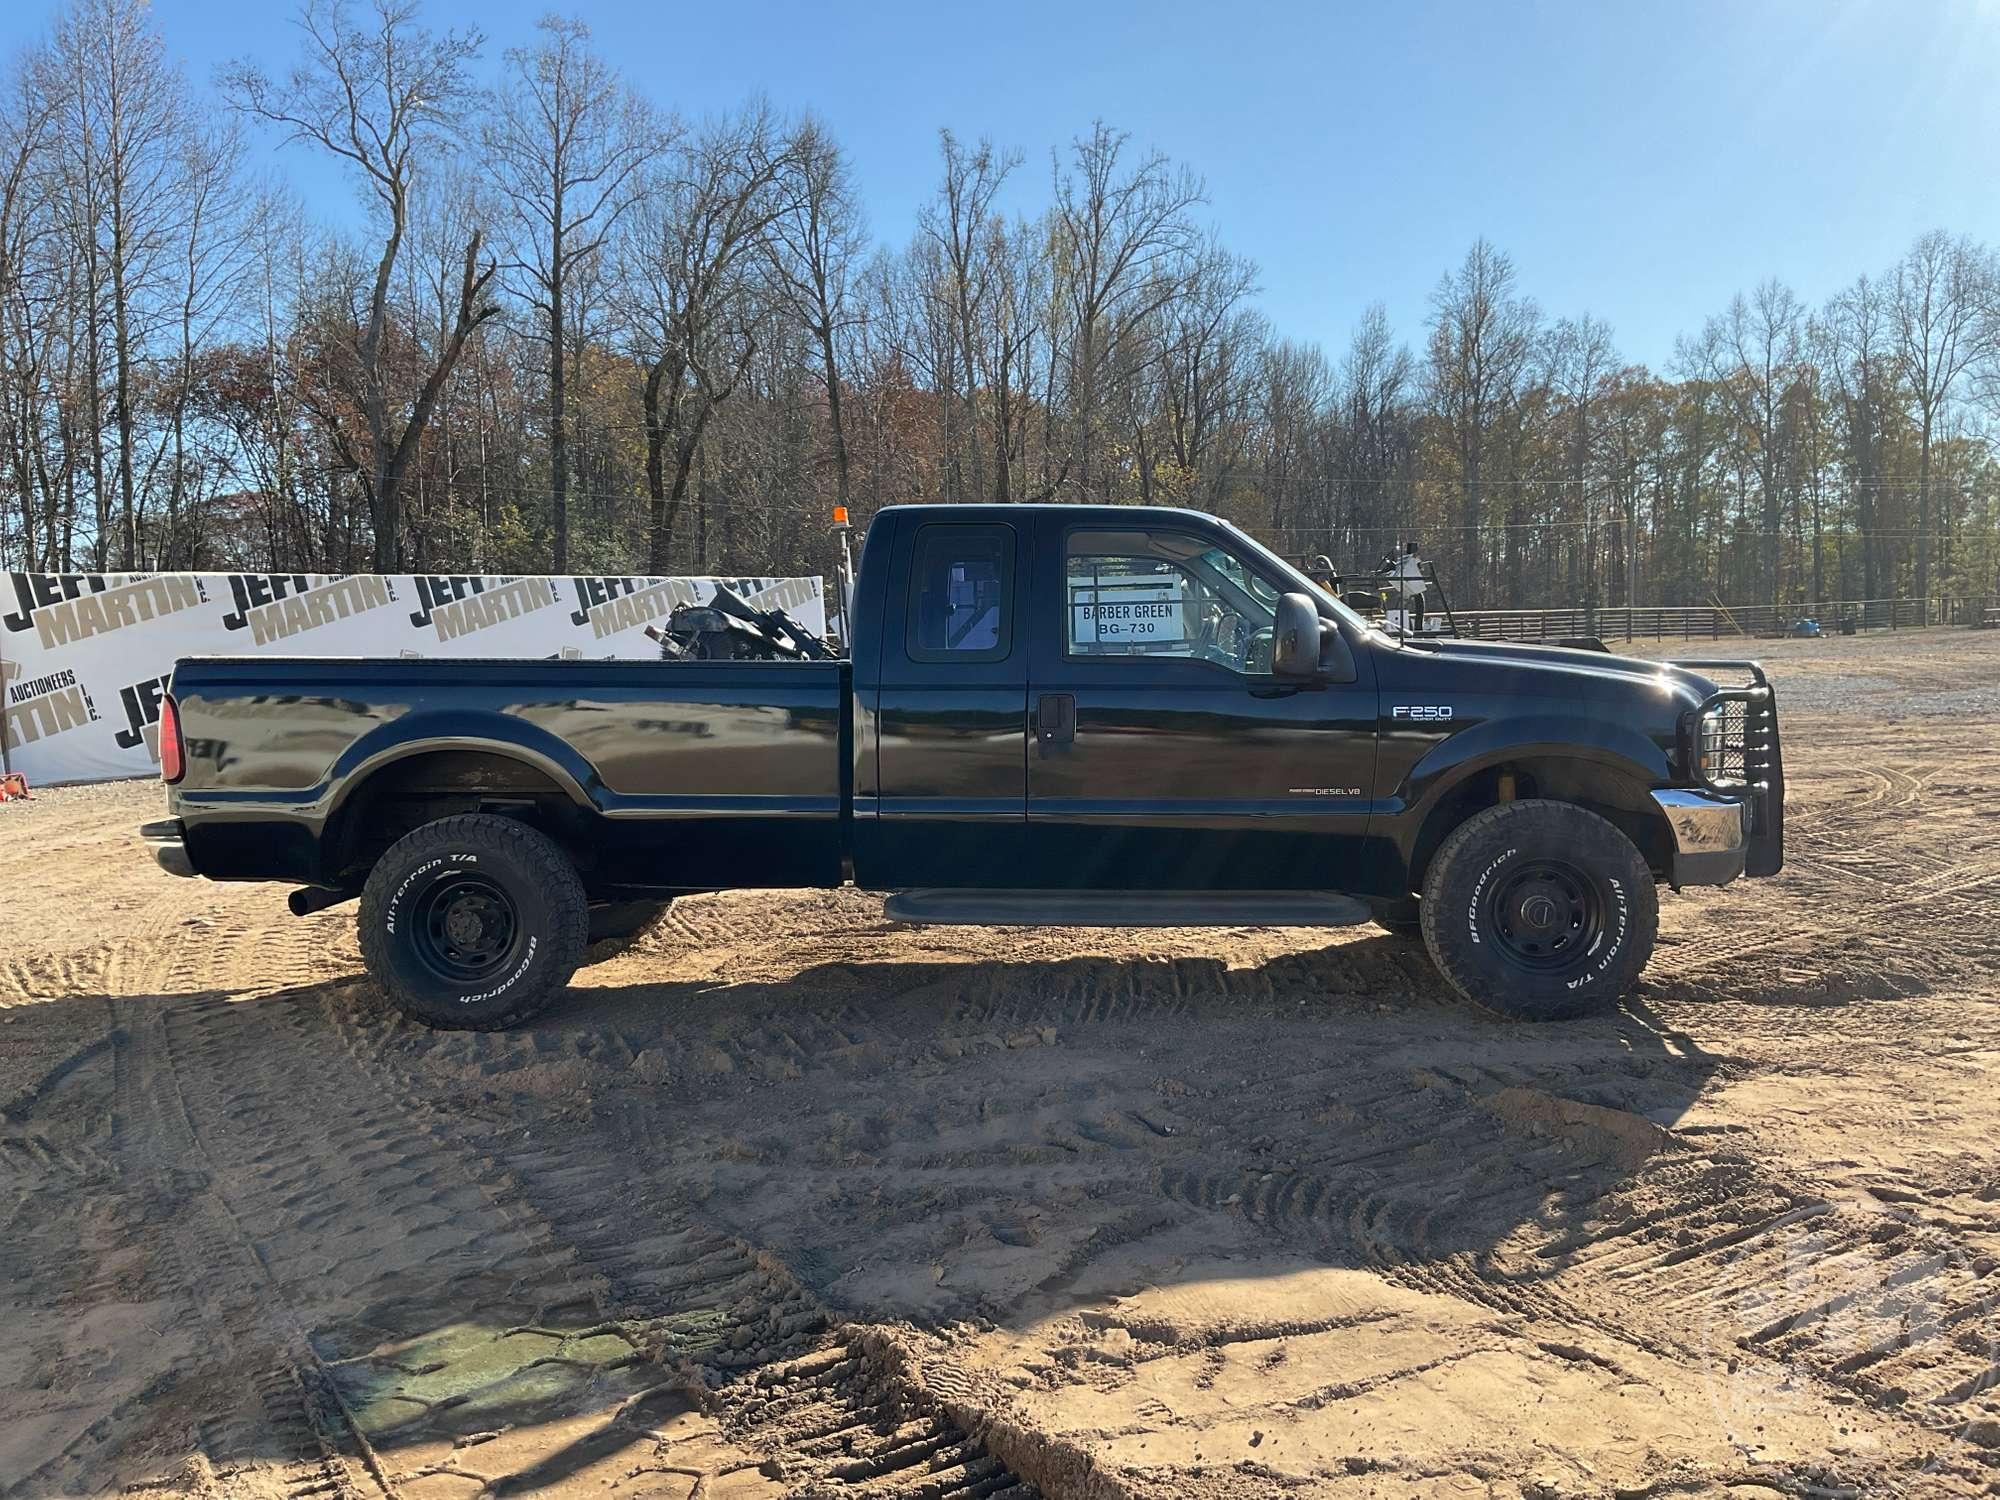 1999 FORD F-250 EXTENDED CAB 4X4 3/4 TON PICKUP VIN: 1FTNX21F9XED97382